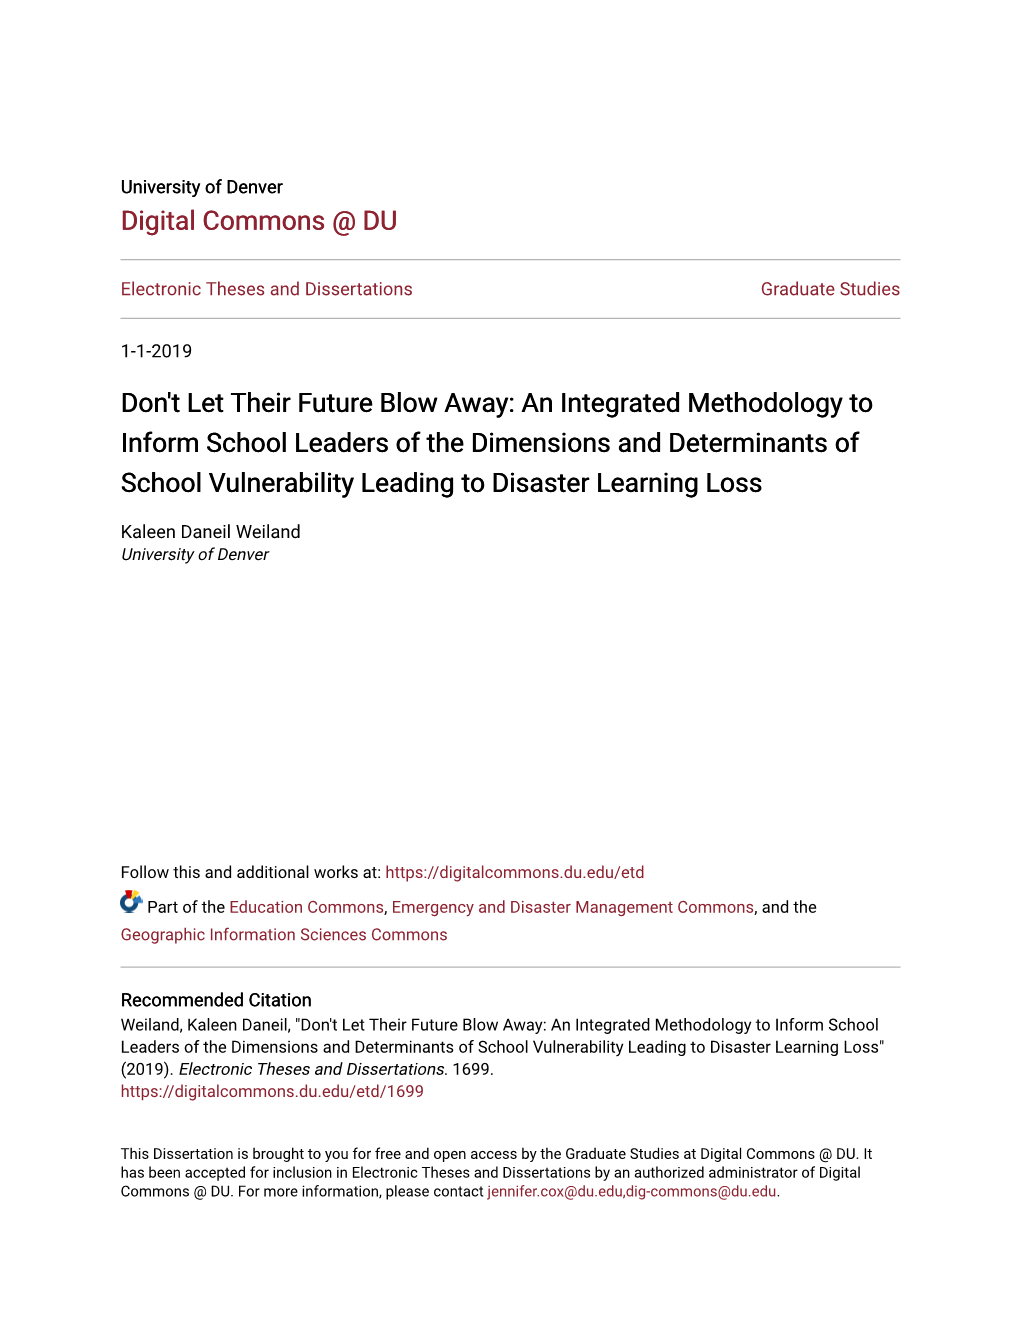 An Integrated Methodology to Inform School Leaders of the Dimensions and Determinants of School Vulnerability Leading to Disaster Learning Loss